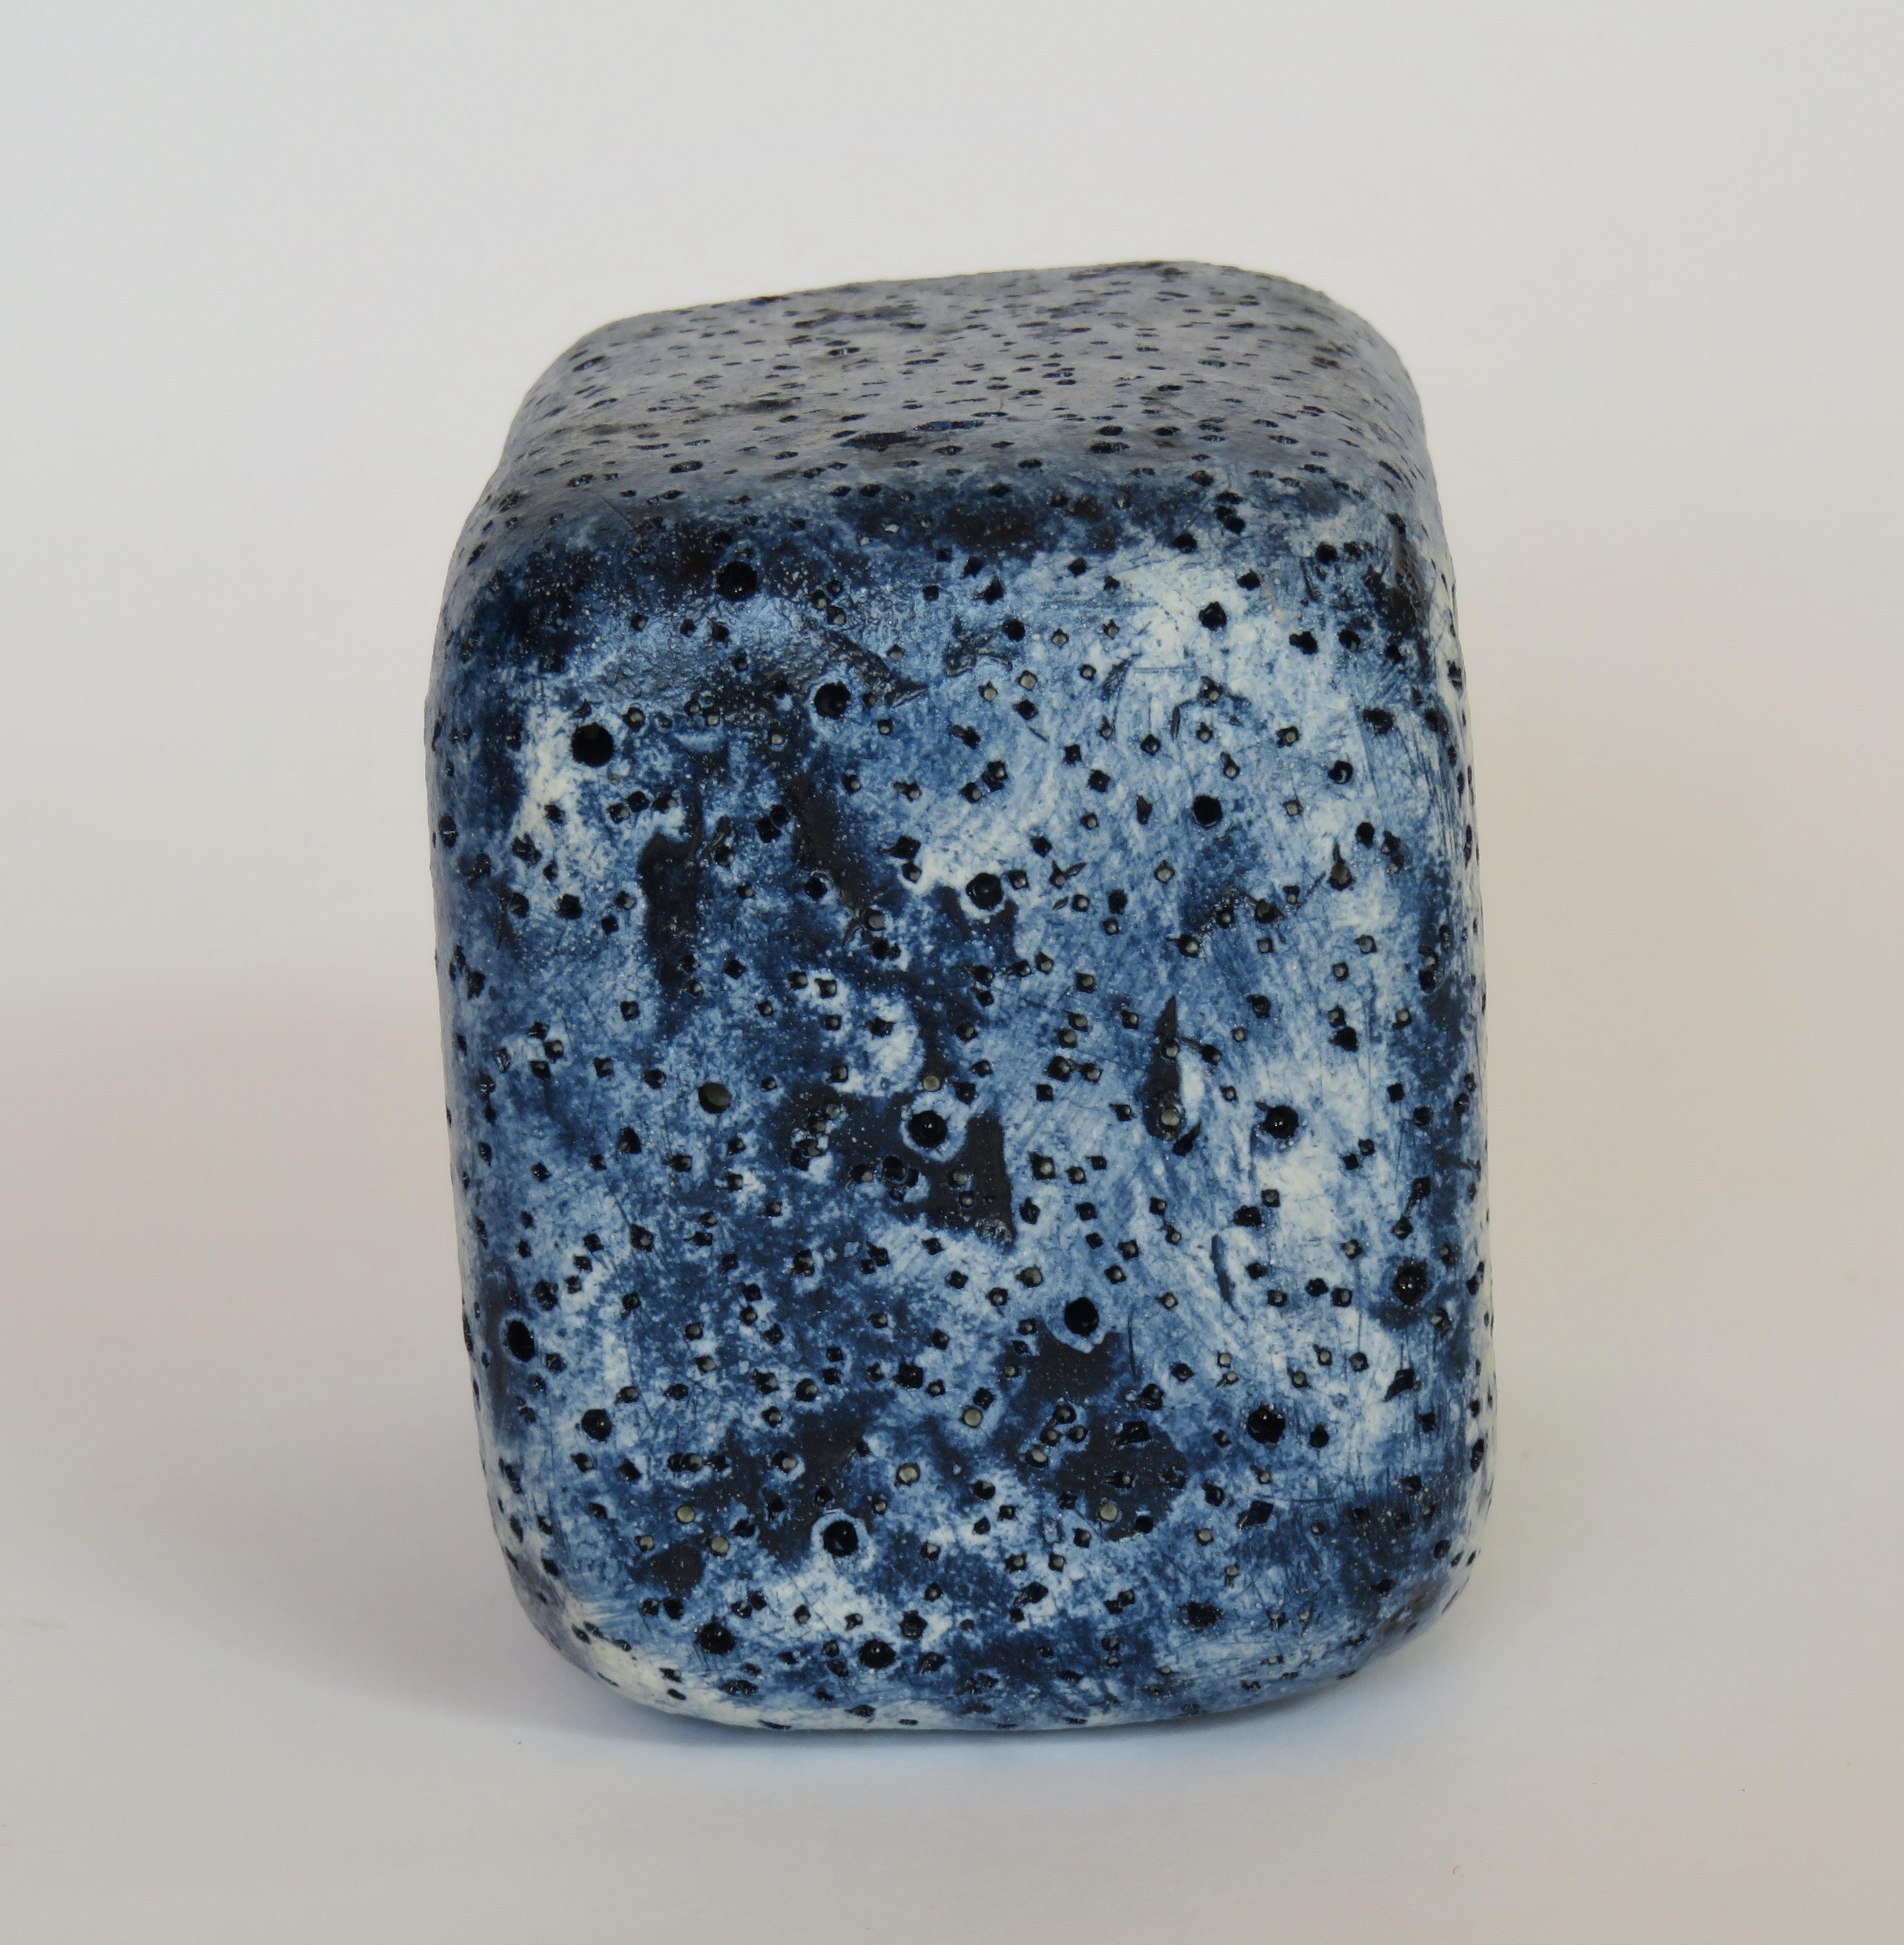 Organic Modern Hand Textured Ceramic Sculpture, Oblong Cube with Oval Opening in Deep Blue Wash